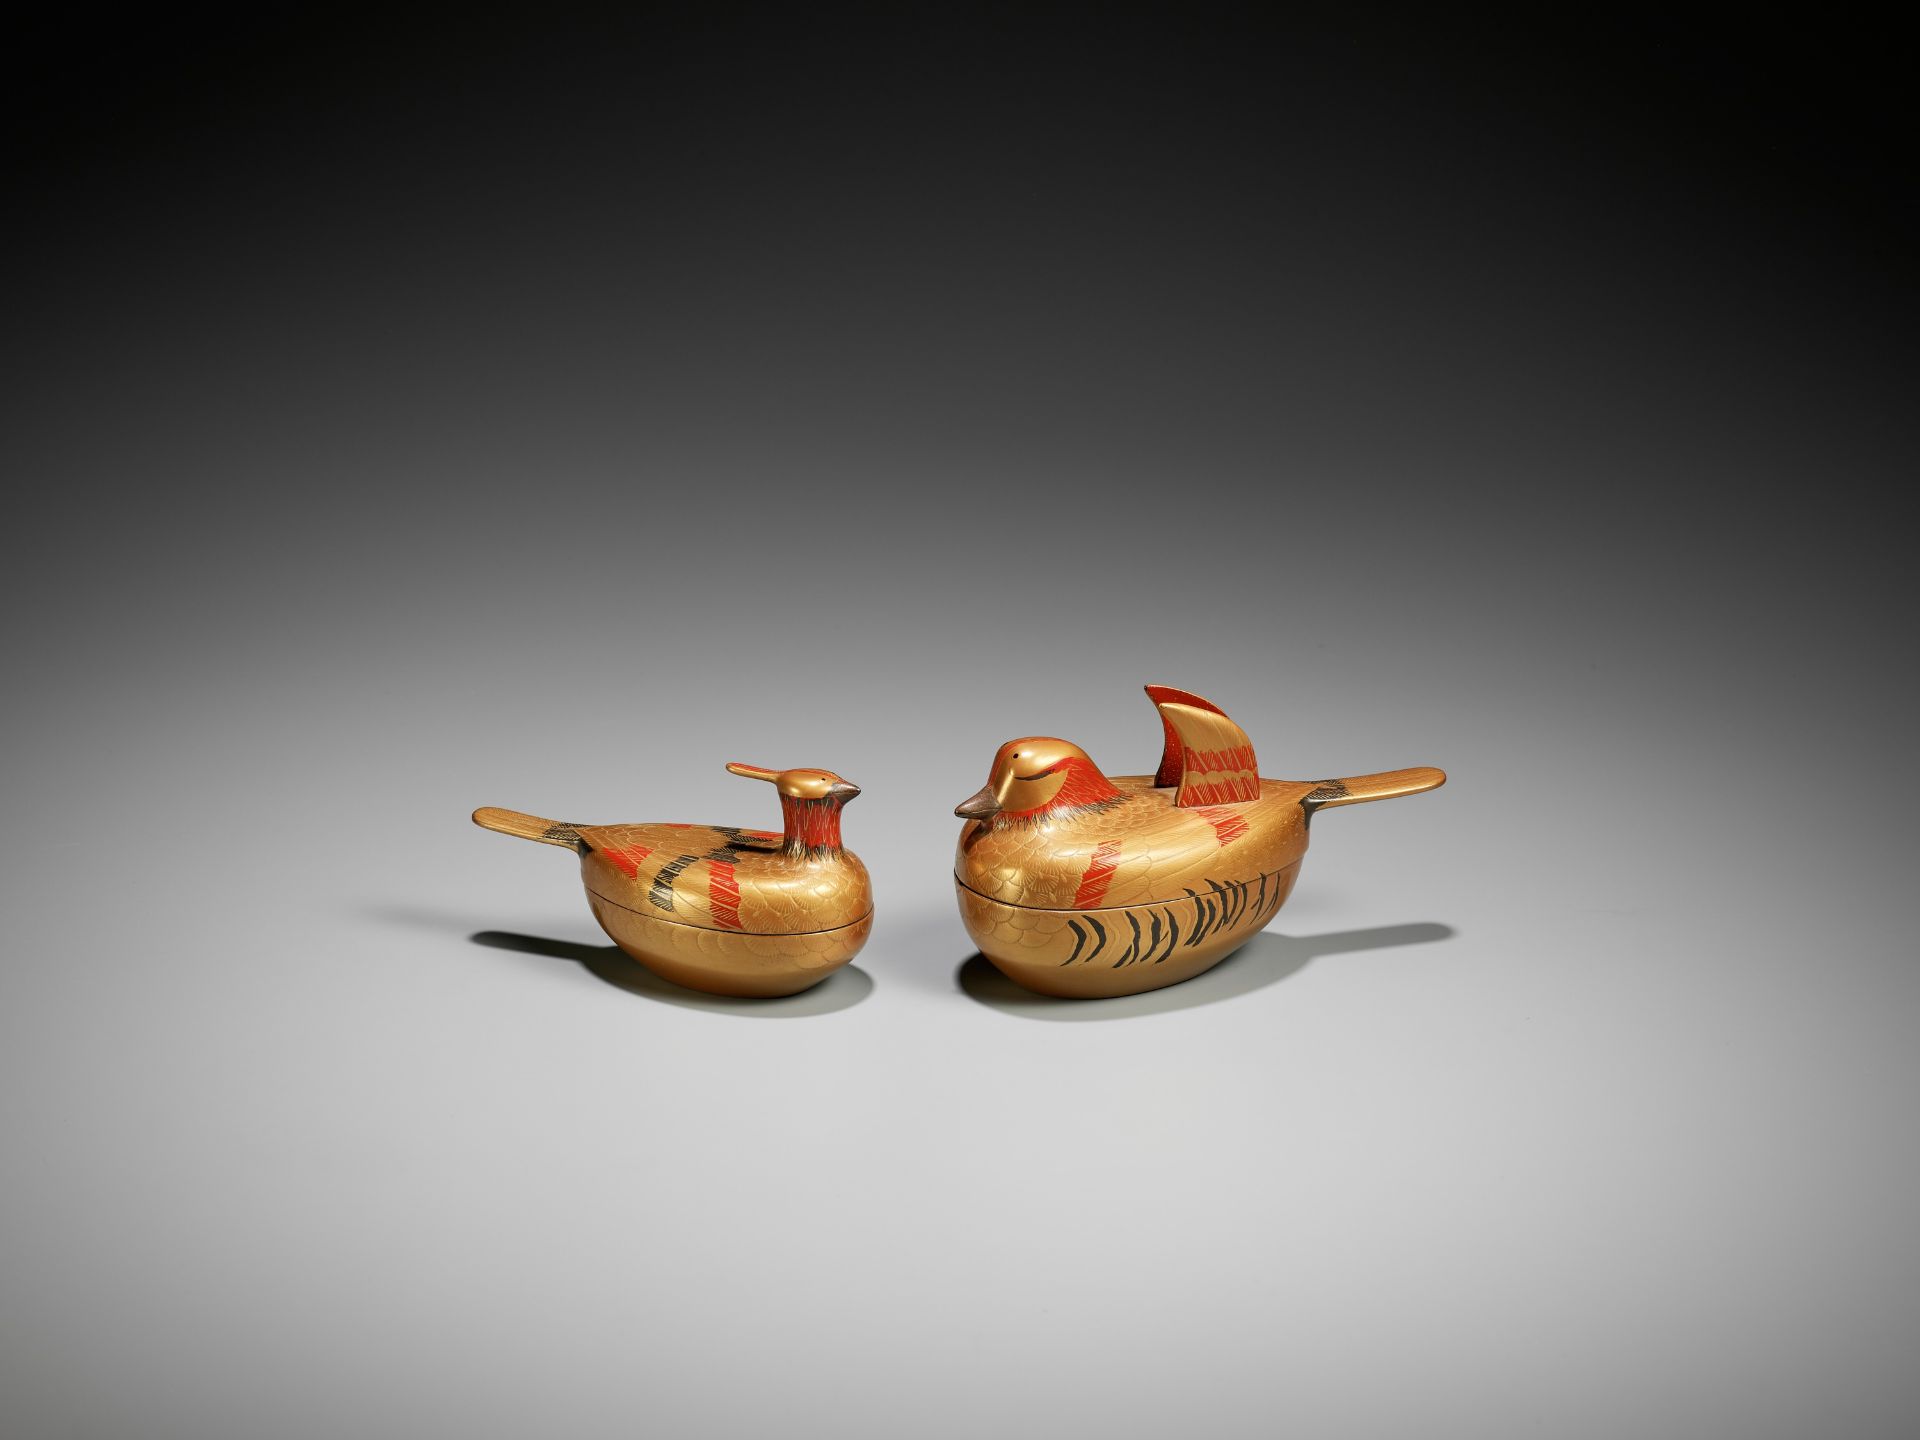 A PAIR OF GOLD LACQUER DUCK-FORM KOGO (INCENSE BOXES) AND COVERS - Image 4 of 9